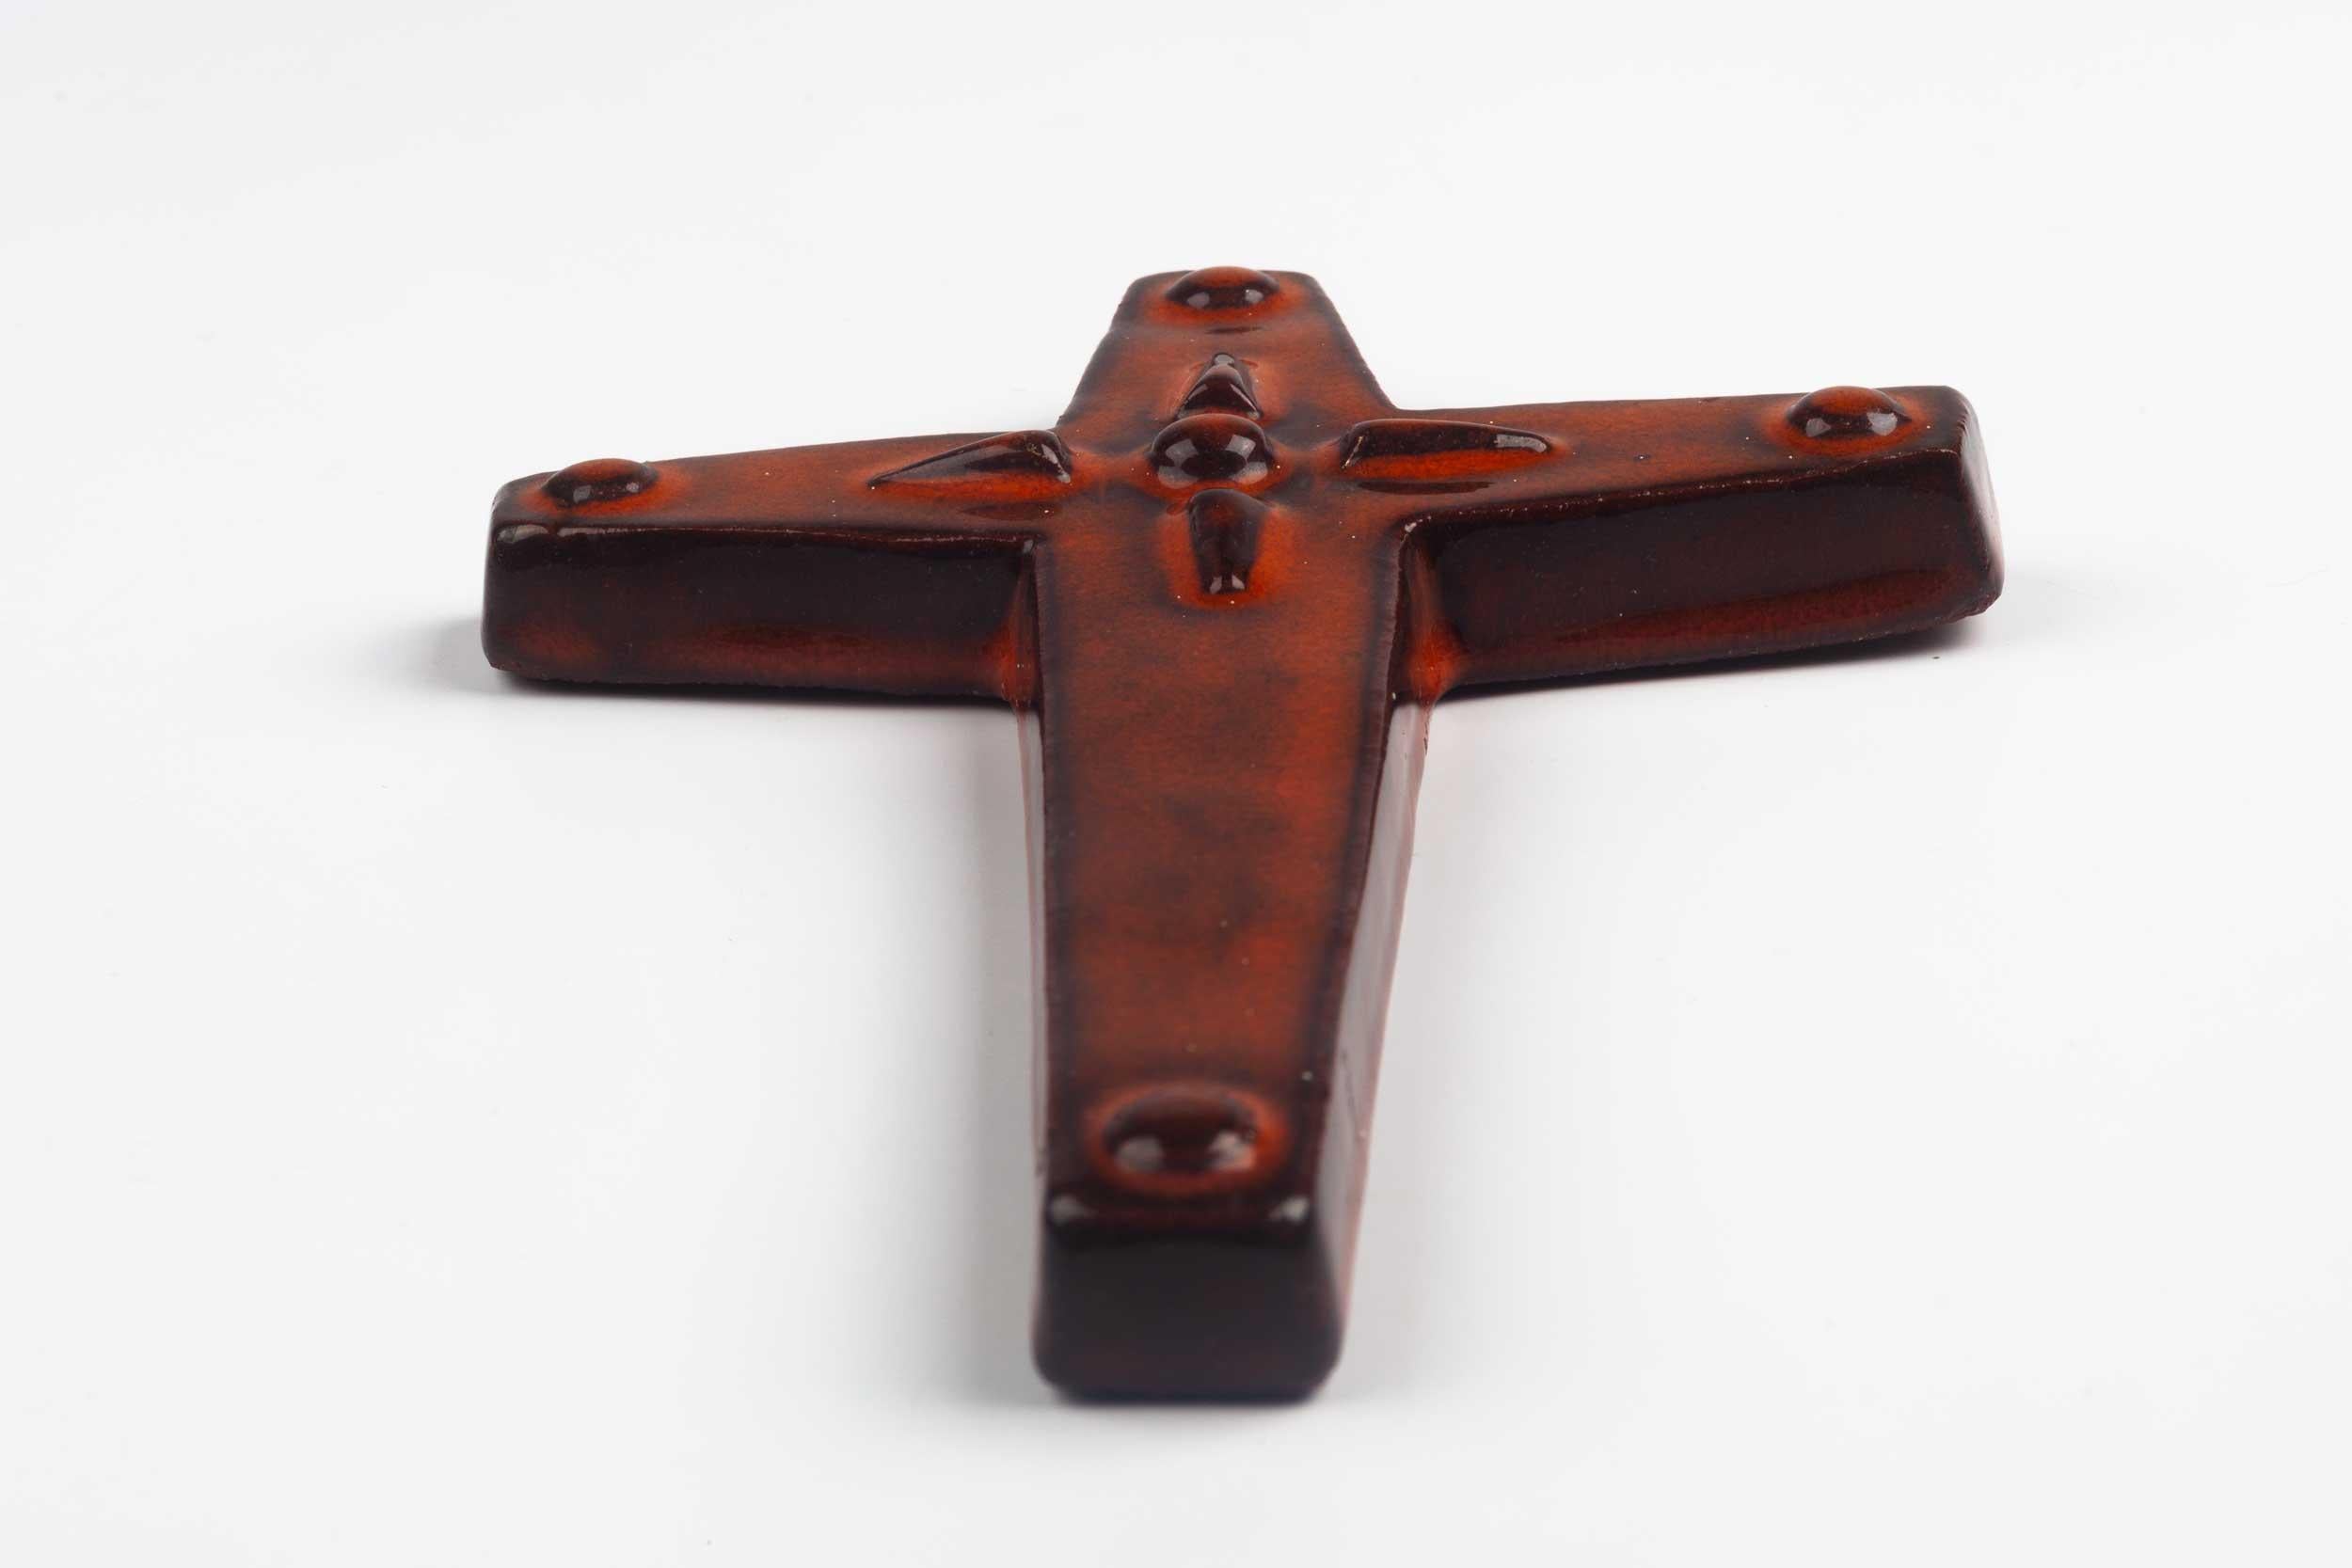 Midcentury European wall cross in glazed, hand painted ceramic with decorative volume. From a large collection of vintage crosses handmade by Flemish artisans. 

From modernism to brutalism, the crosses in our collection range from being as